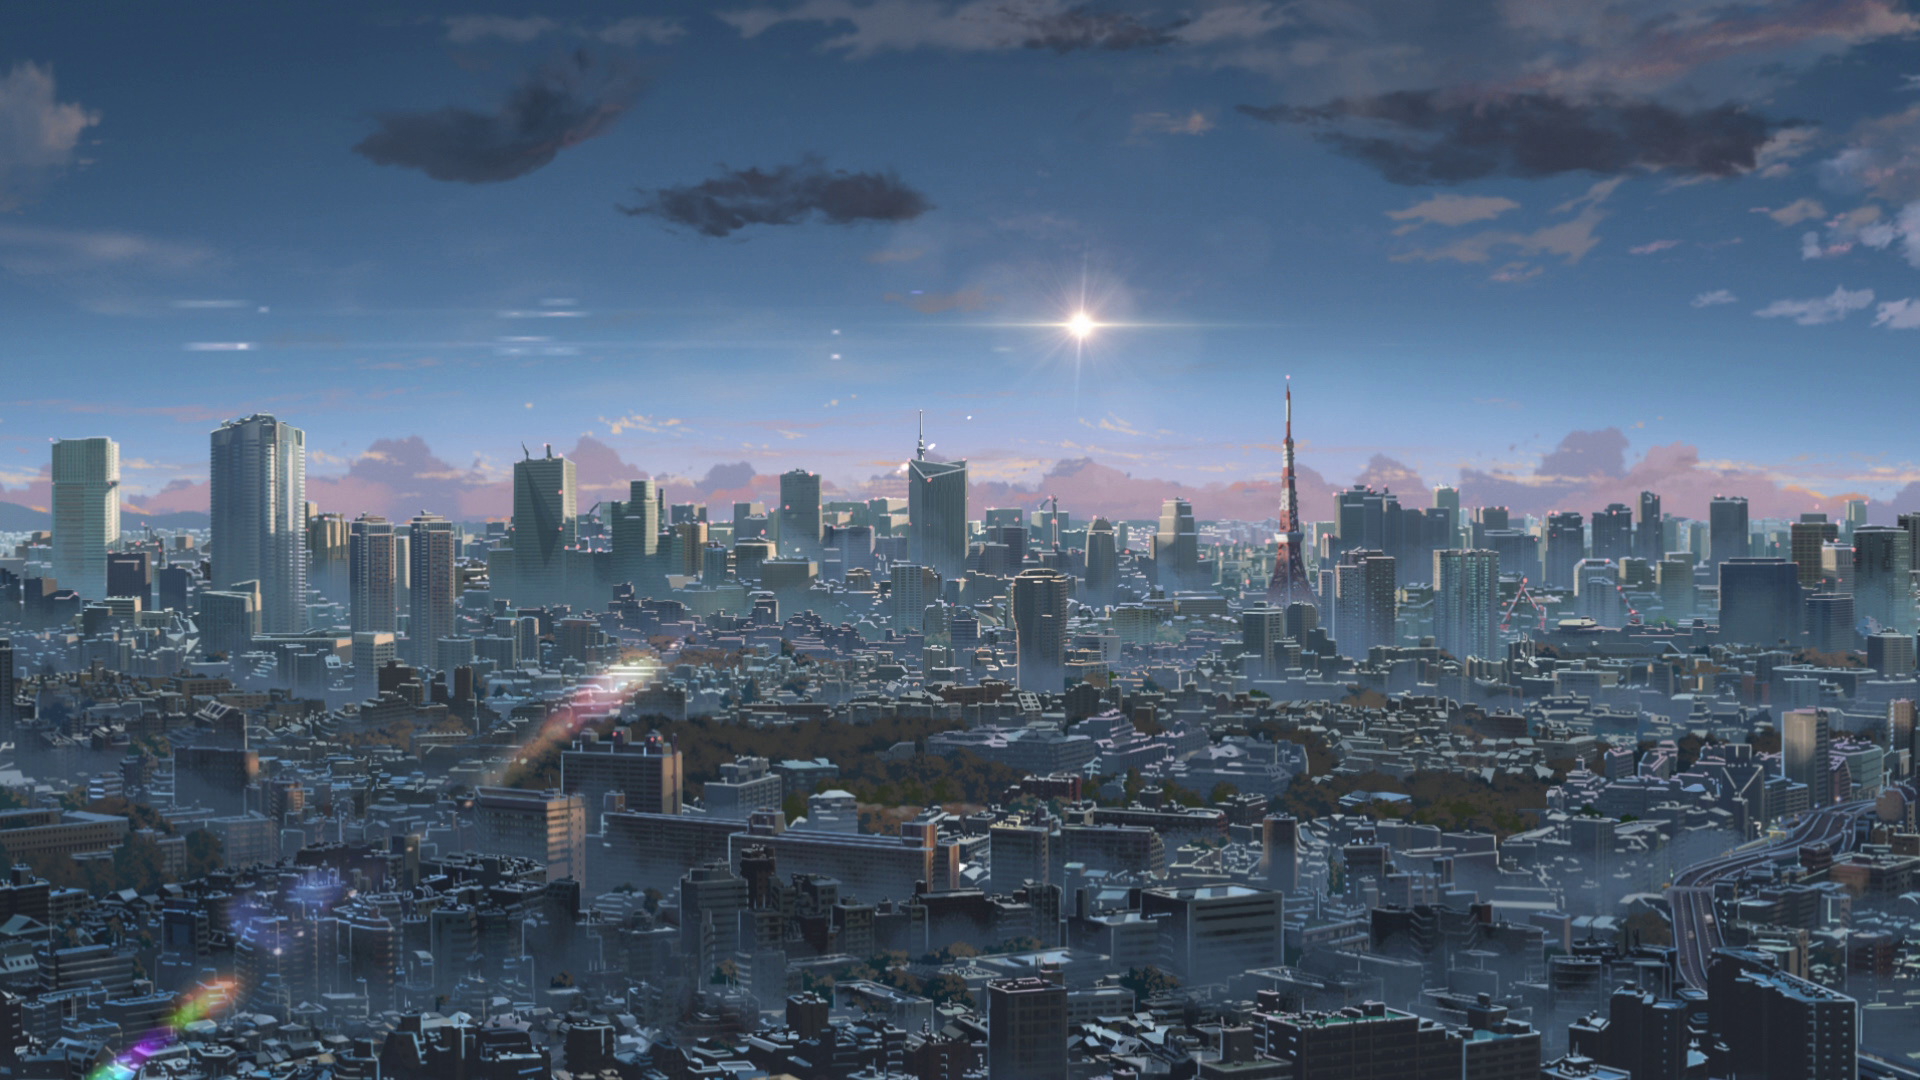 Your Name Hd Wallpaper Background Image 1920x1080 Id 861597 Wallpaper Abyss